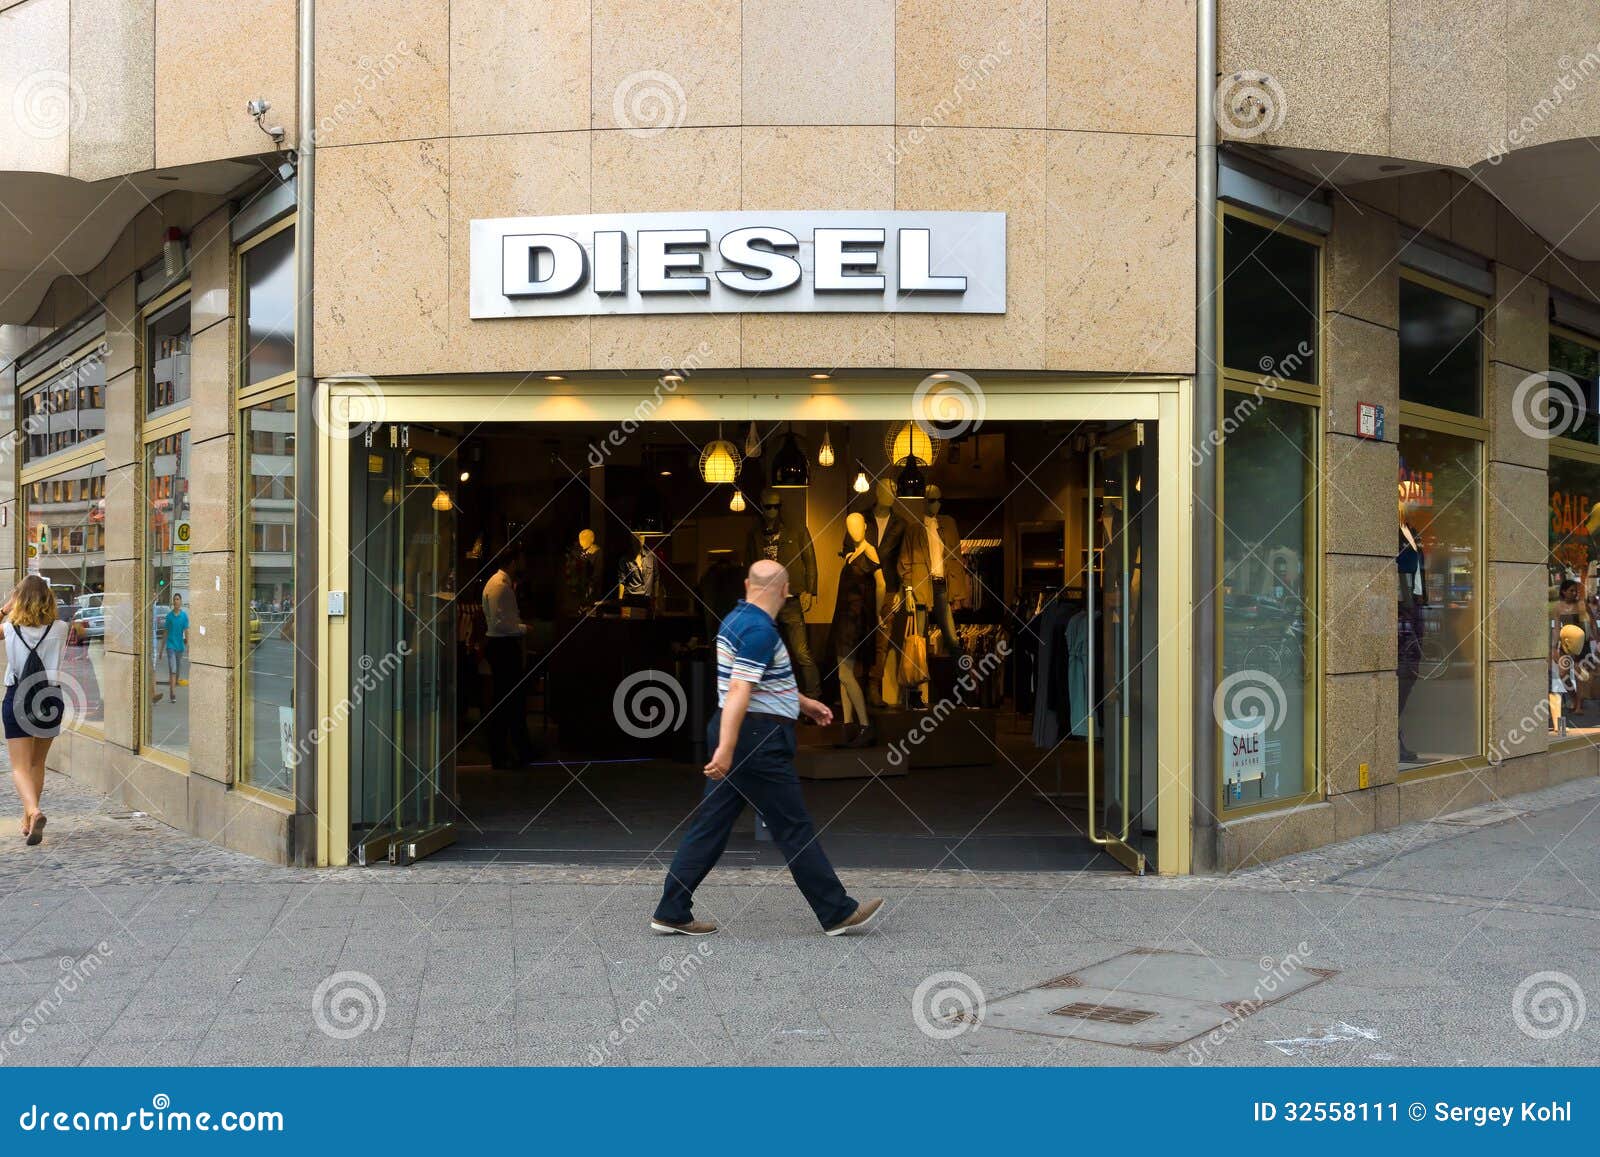 The Italian Clothing Company Diesel Released An